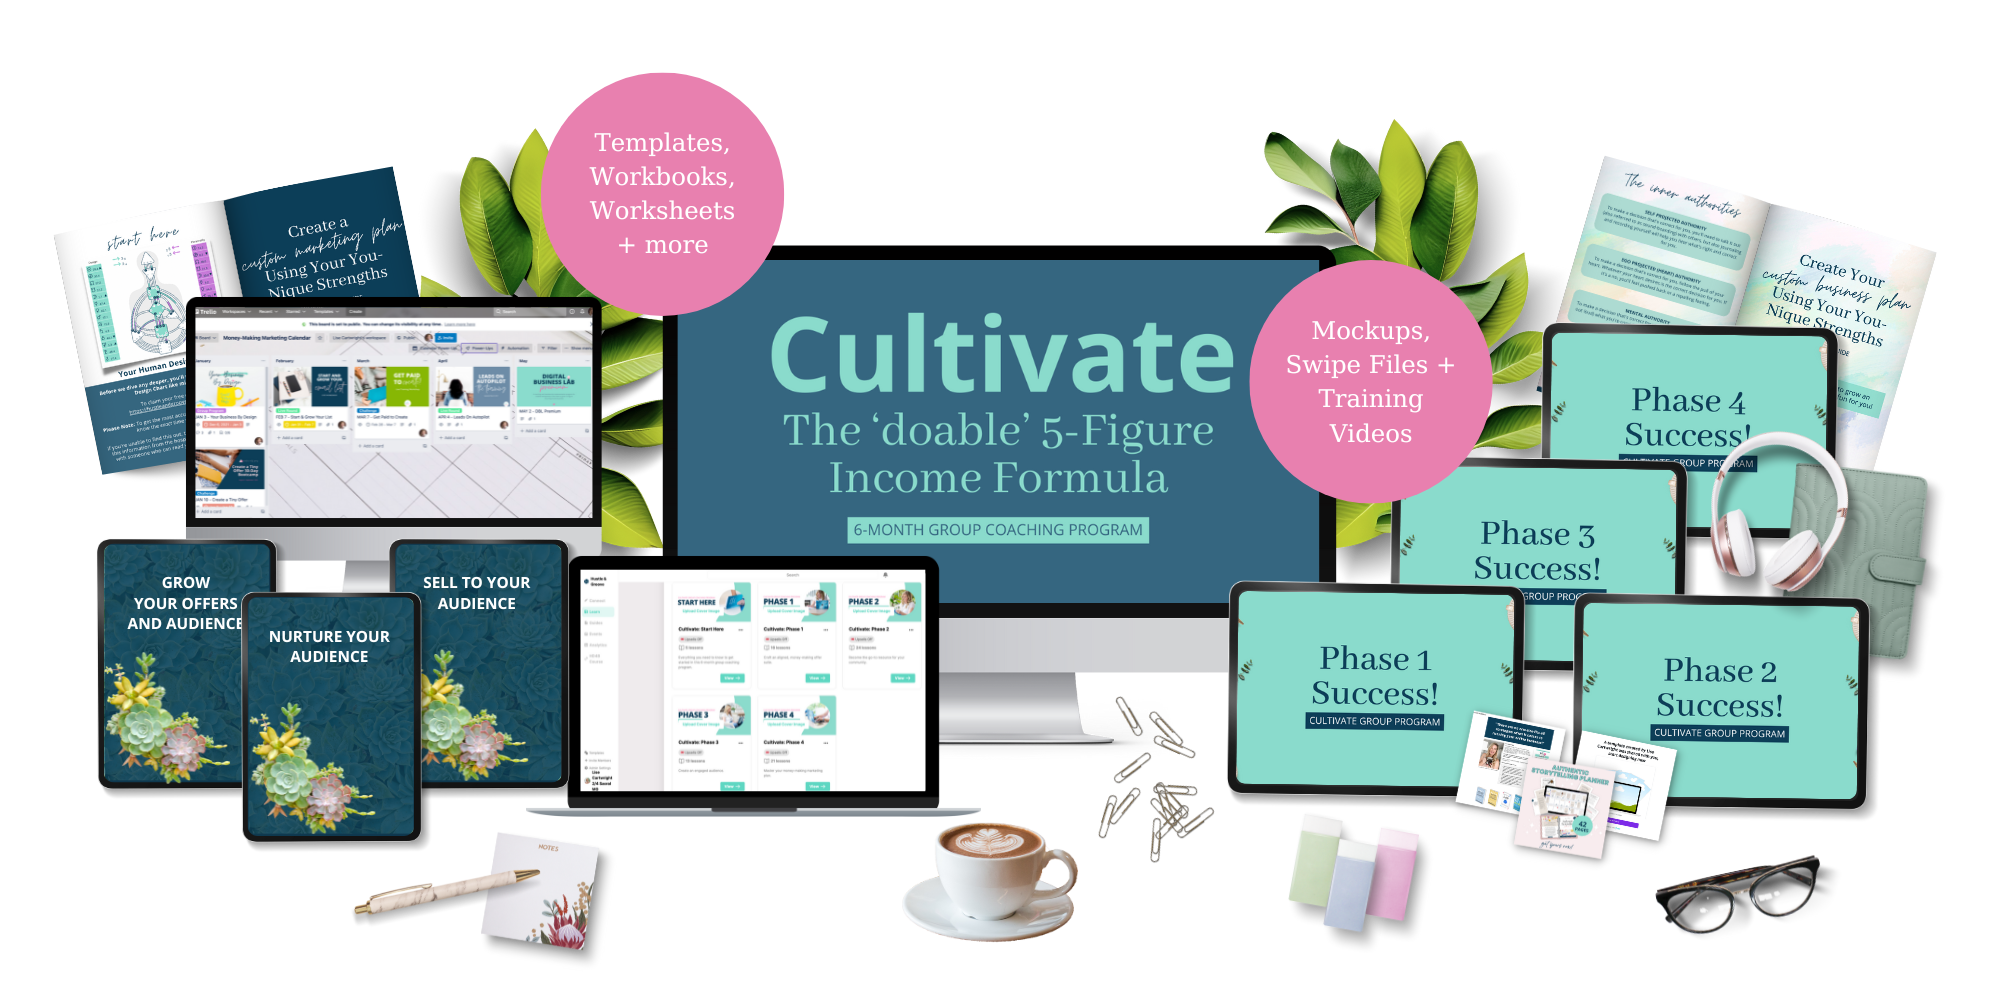 Join The Cultivate 6-month Group Coaching Program